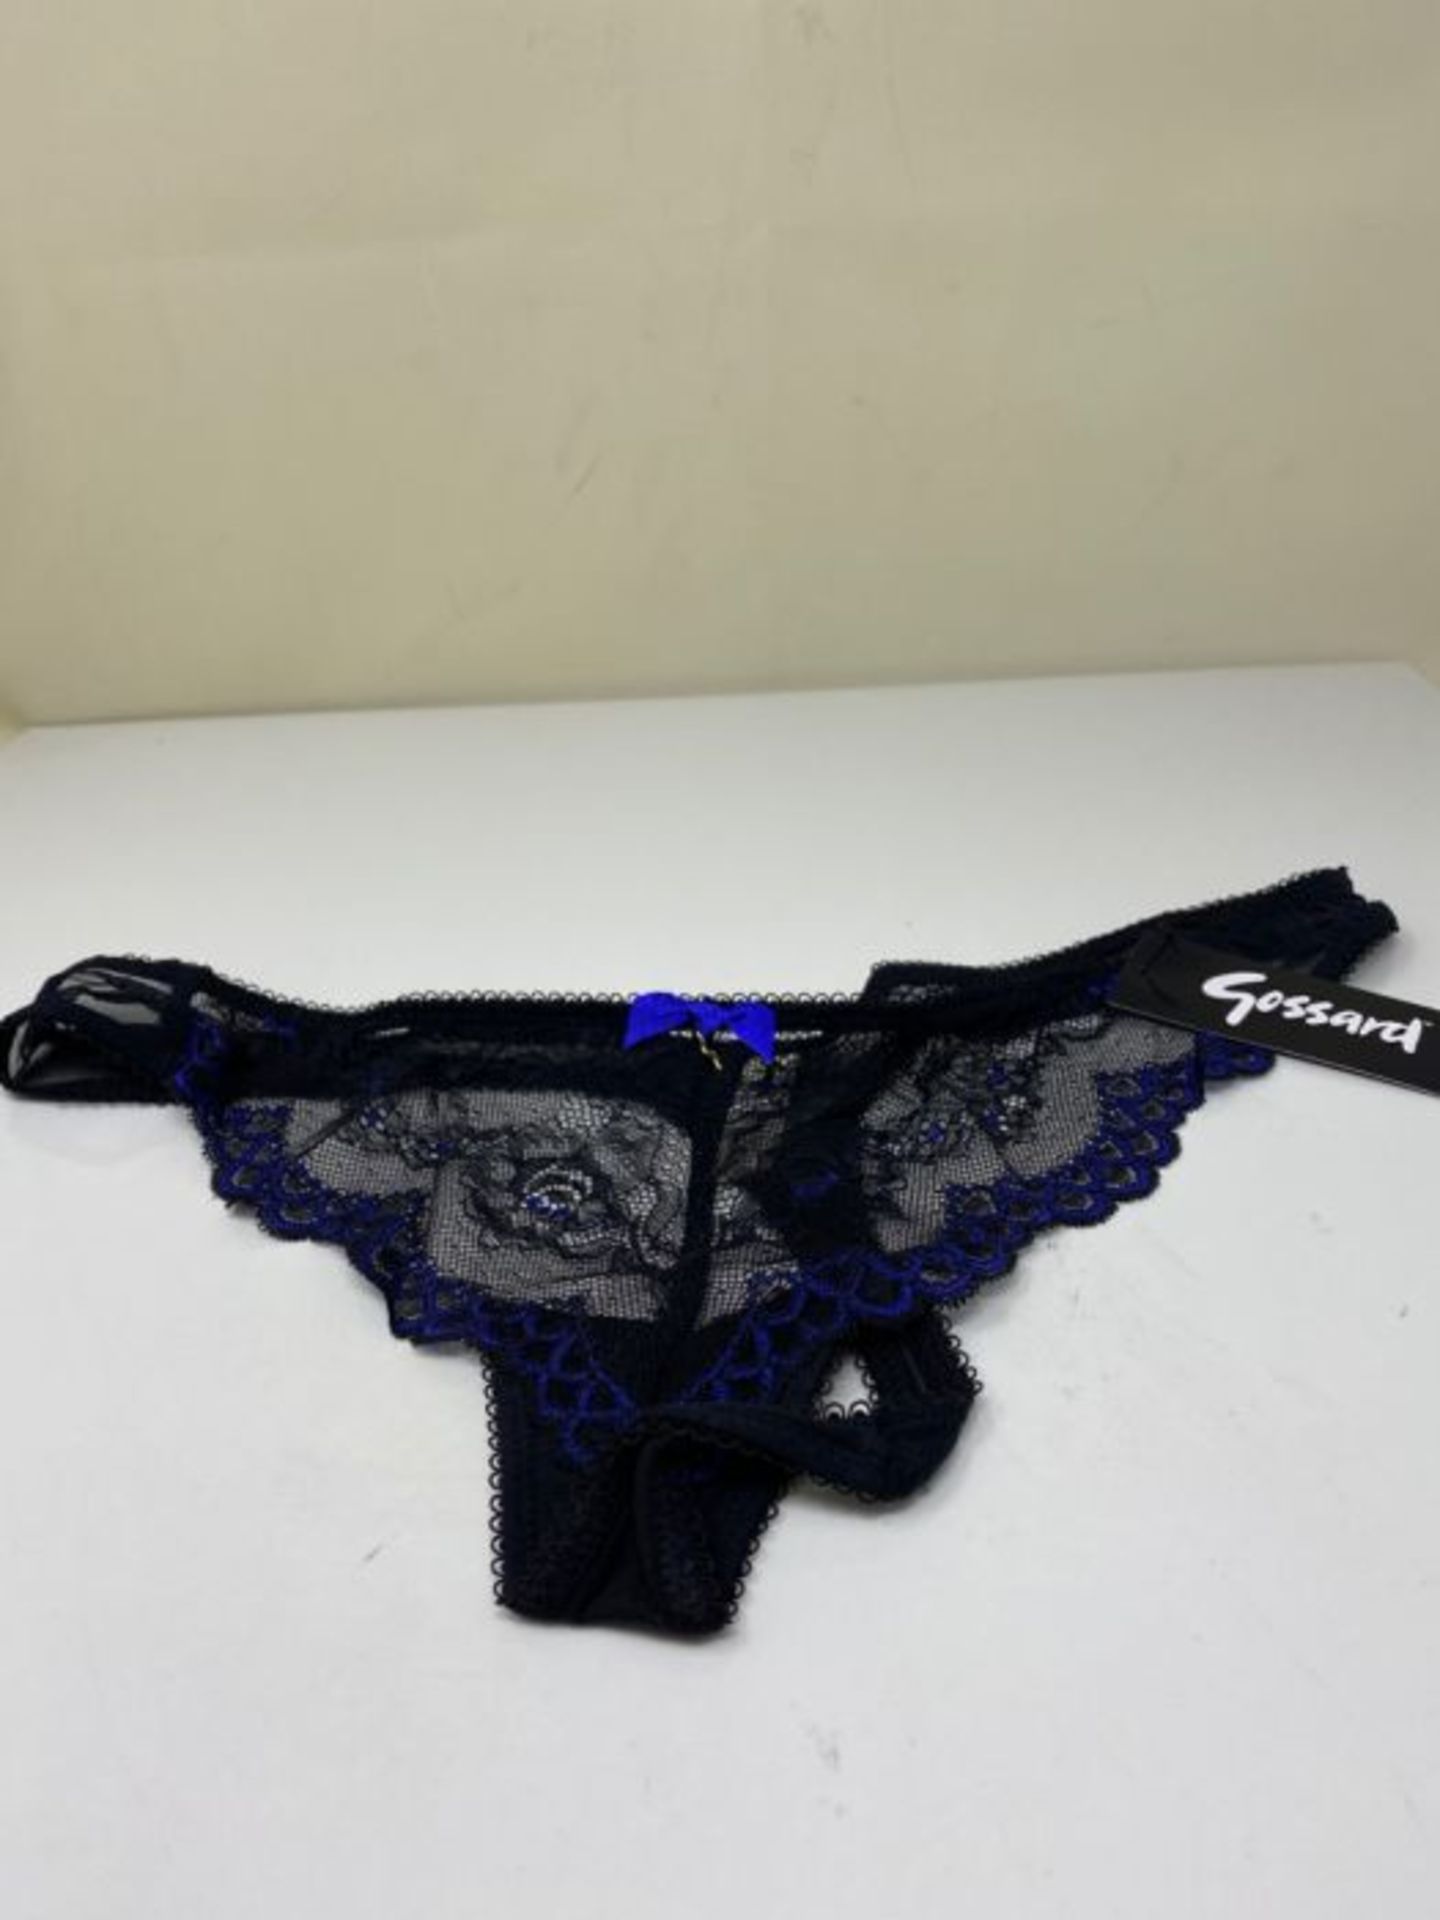 Gossard Women's Superboost Lace Thong Panties, Black/Electric Blue, Extra Small - Image 4 of 4